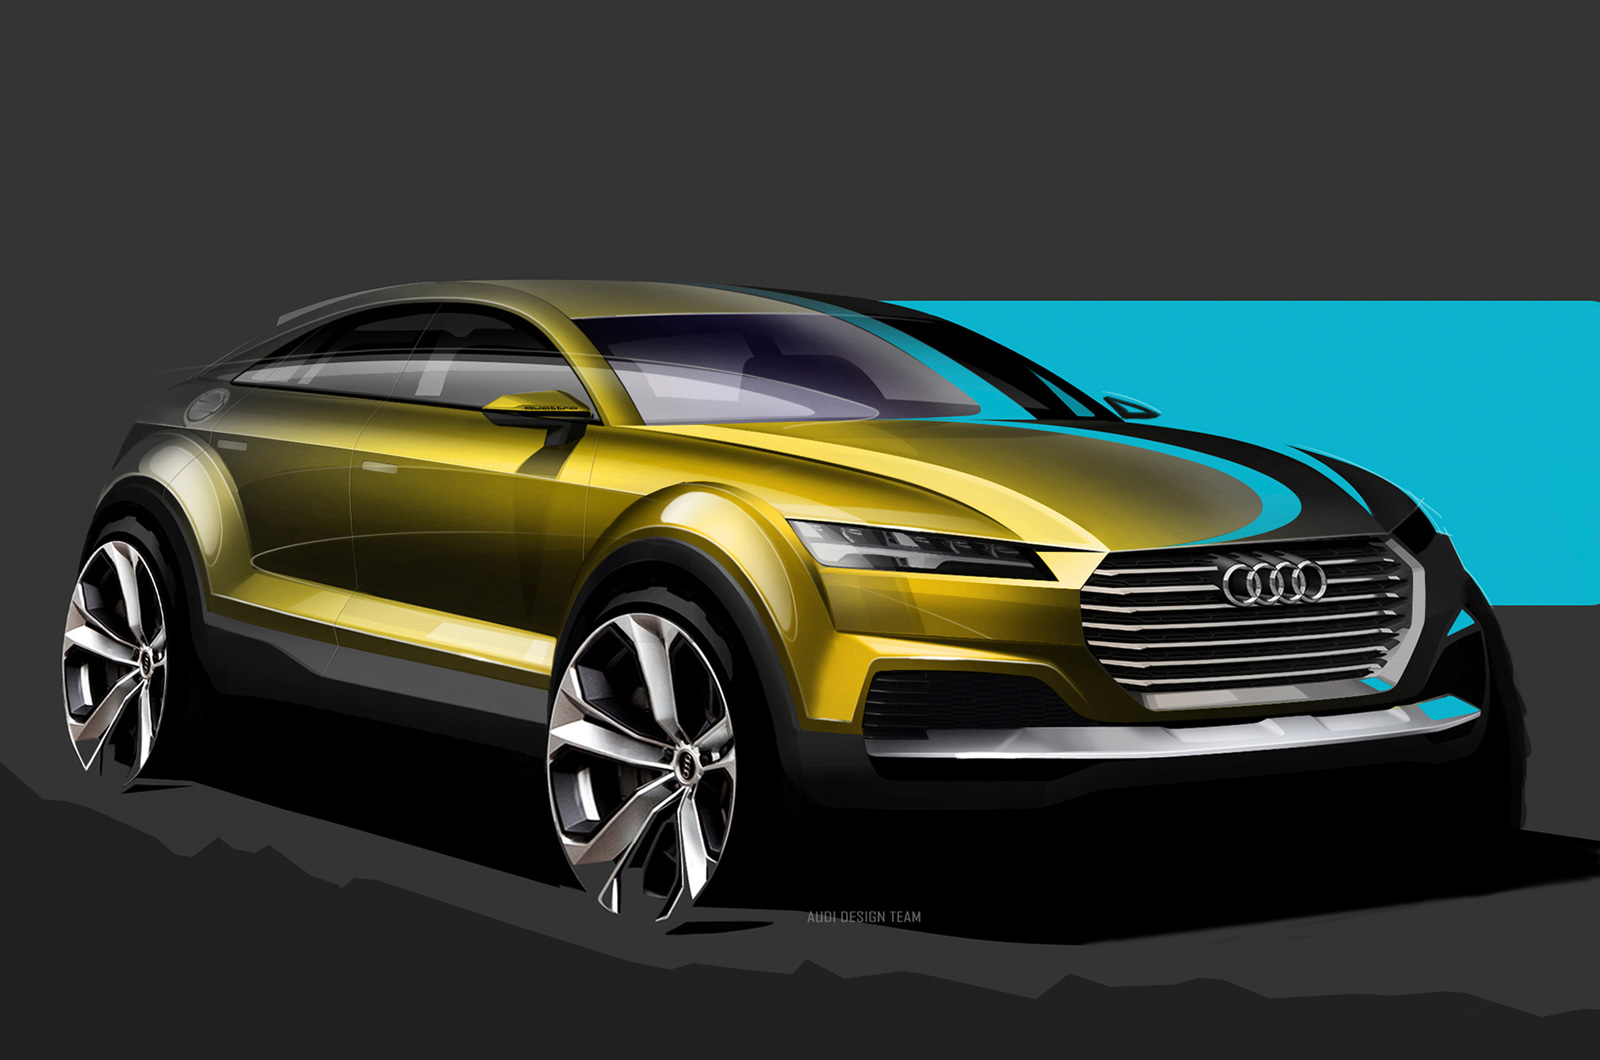 Audi Q4 Compact Suv Concept Revealed In New Sketches